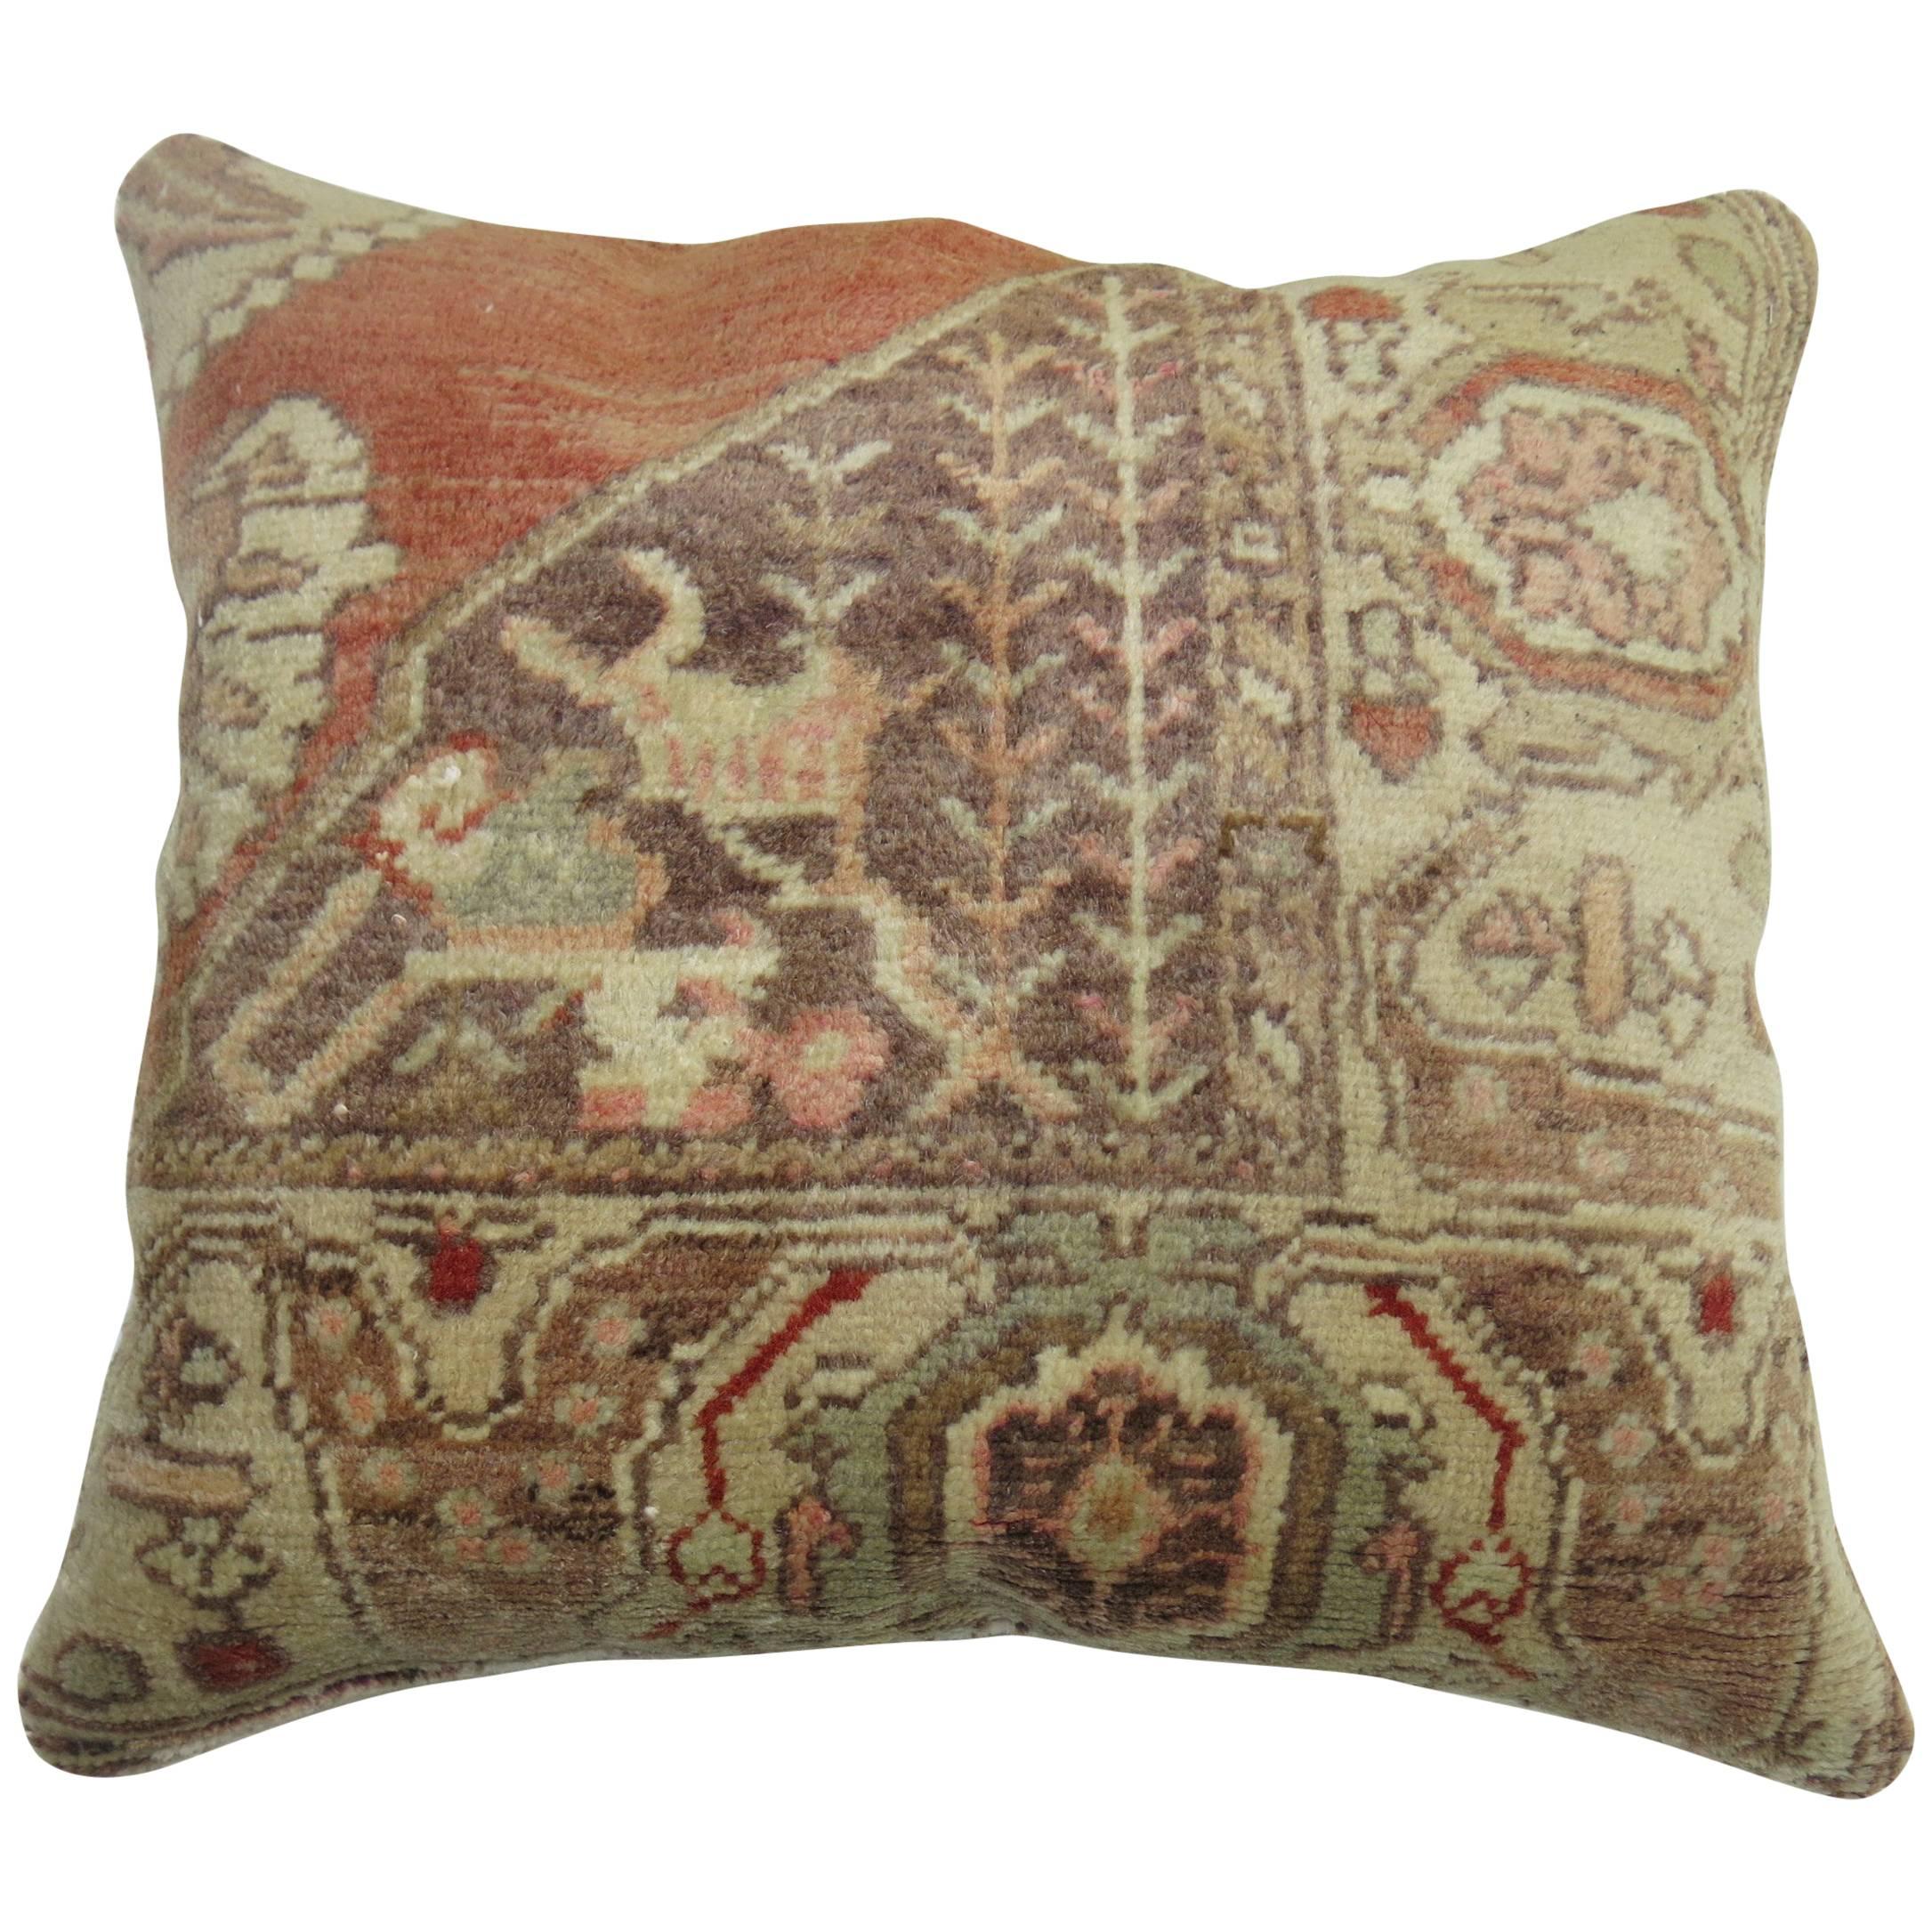 Decorative Turkish Rug Pillow For Sale